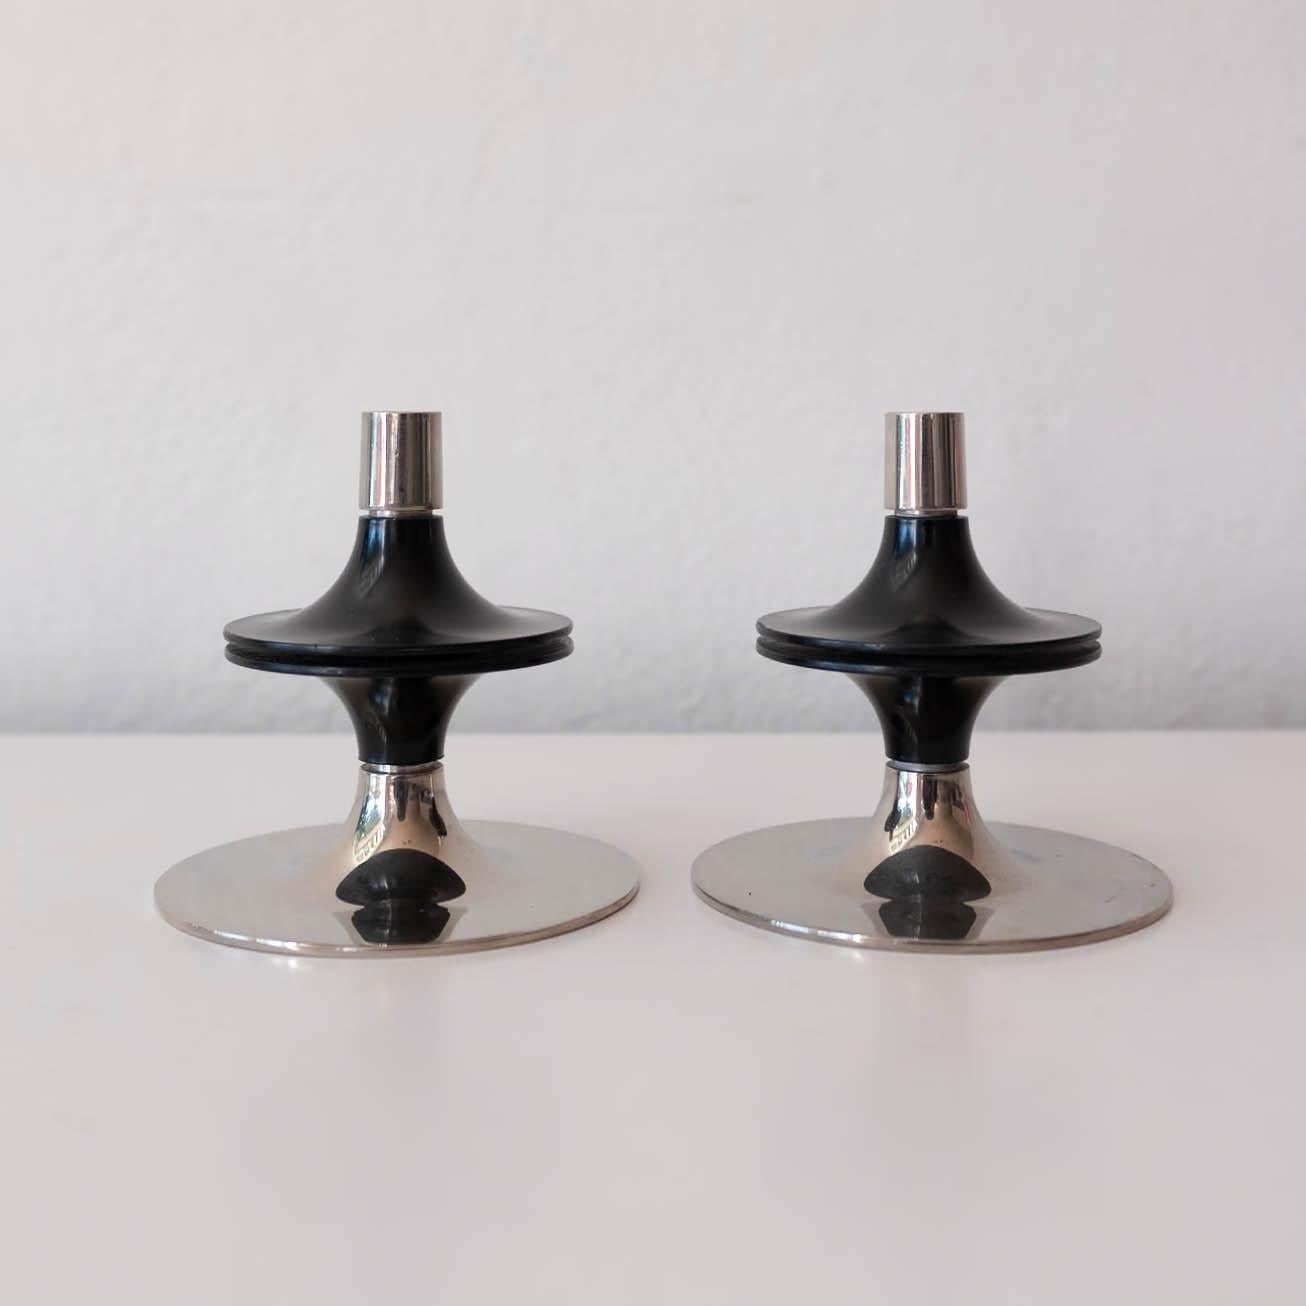 A pair of uncommon 1960s modernist stackable and modular candle holders, designed by Werner Stoff and commissioned by Hans Nagel for Gebrüder Nagel AG, Wesseling, Germany. This set can be combined with the more common Nagel modular candle set.